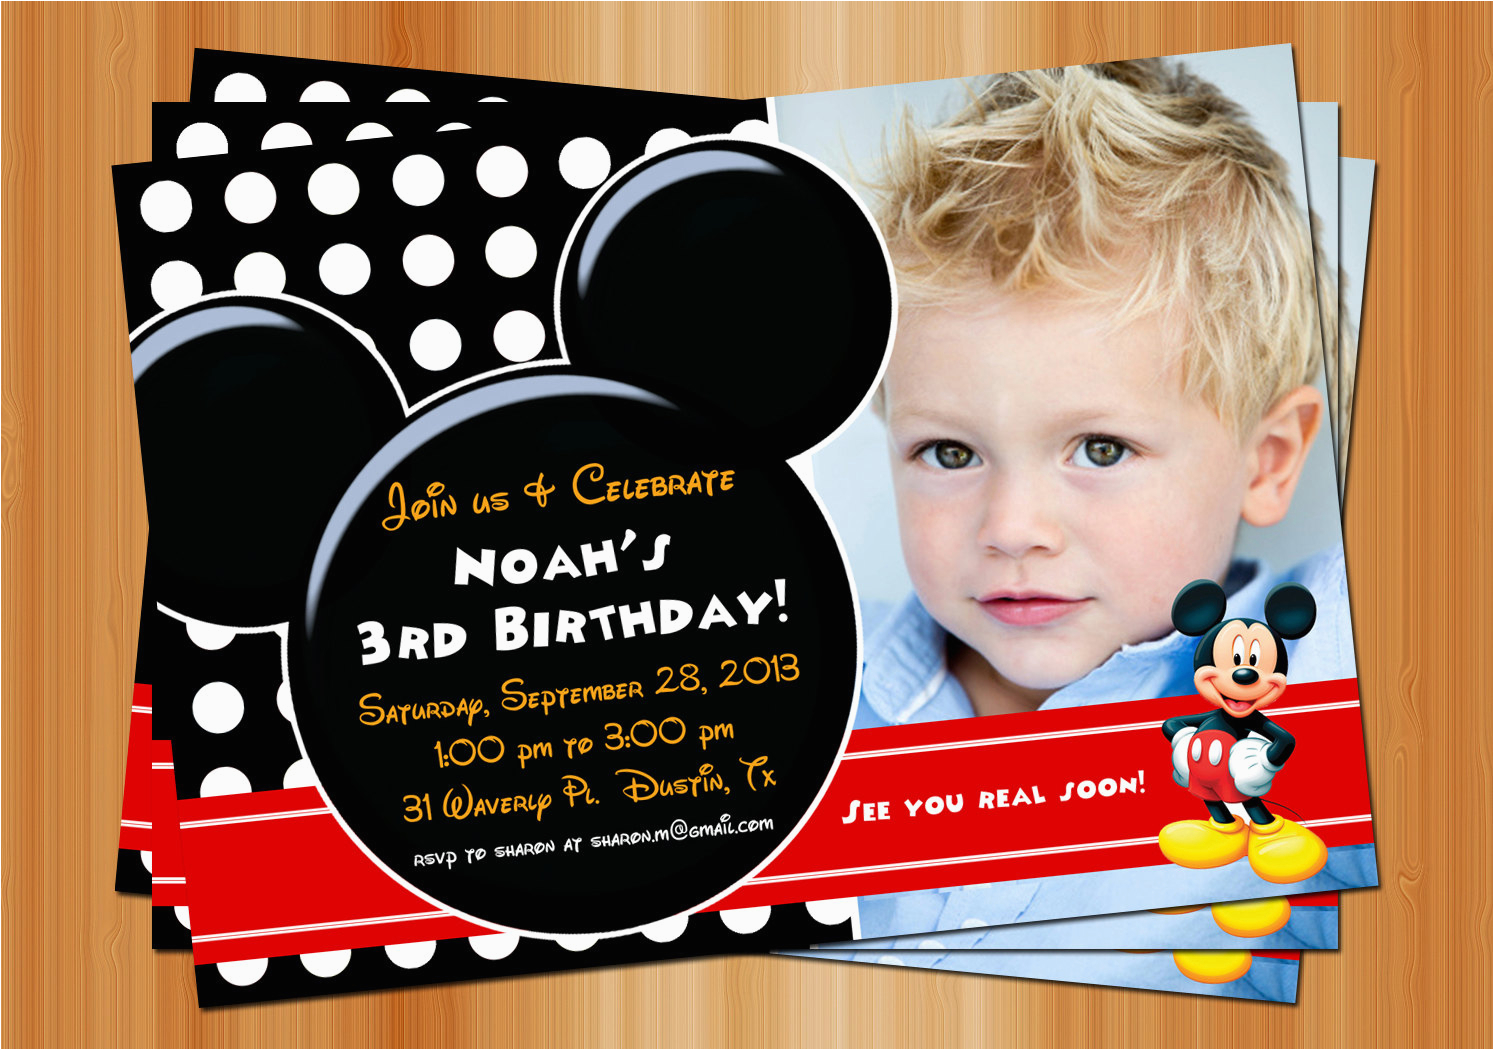 How to Make Mickey Mouse Birthday Invitations Mickey Mouse Birthday Invitation Printable Birthday Party